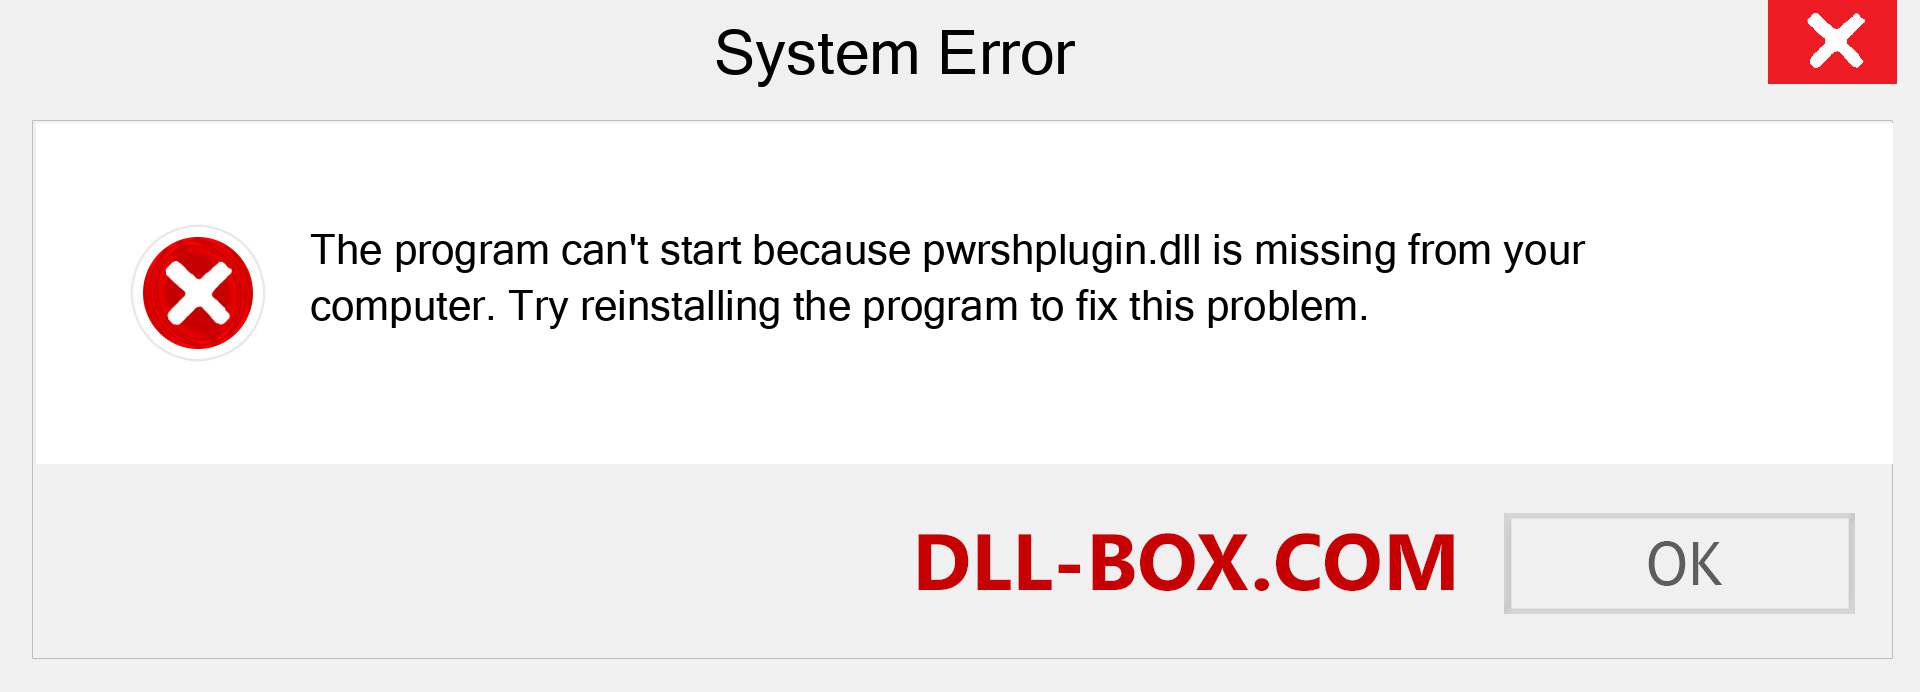  pwrshplugin.dll file is missing?. Download for Windows 7, 8, 10 - Fix  pwrshplugin dll Missing Error on Windows, photos, images